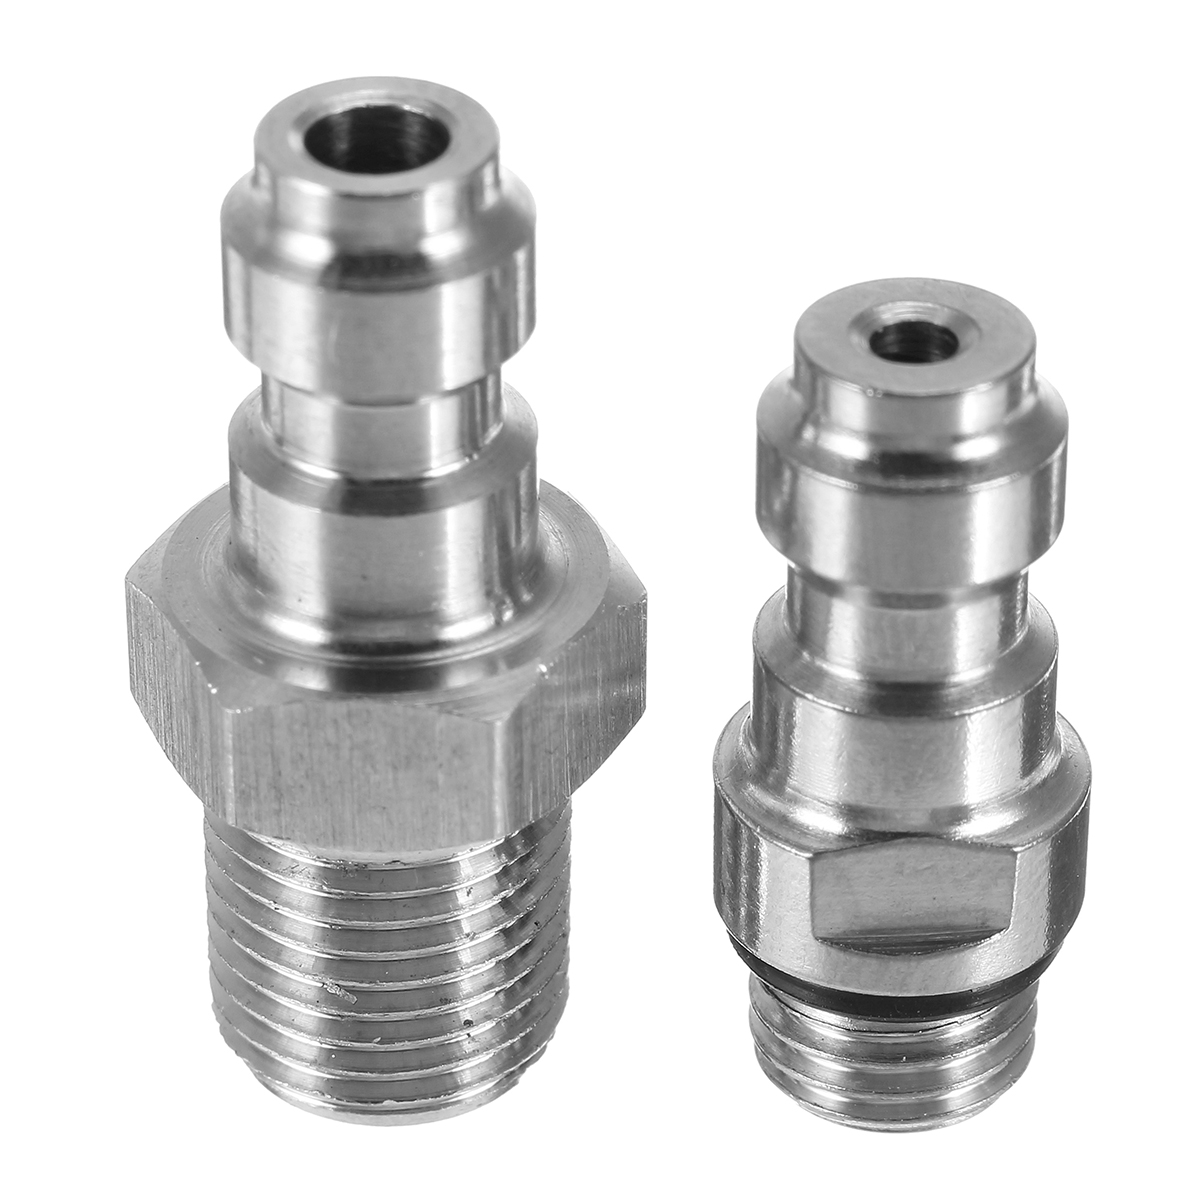 

M8x1.0 Threads PCP Fill Nipple Stainless Steel 8mm Air Tank One Way Foster Fitting Screwed Joint